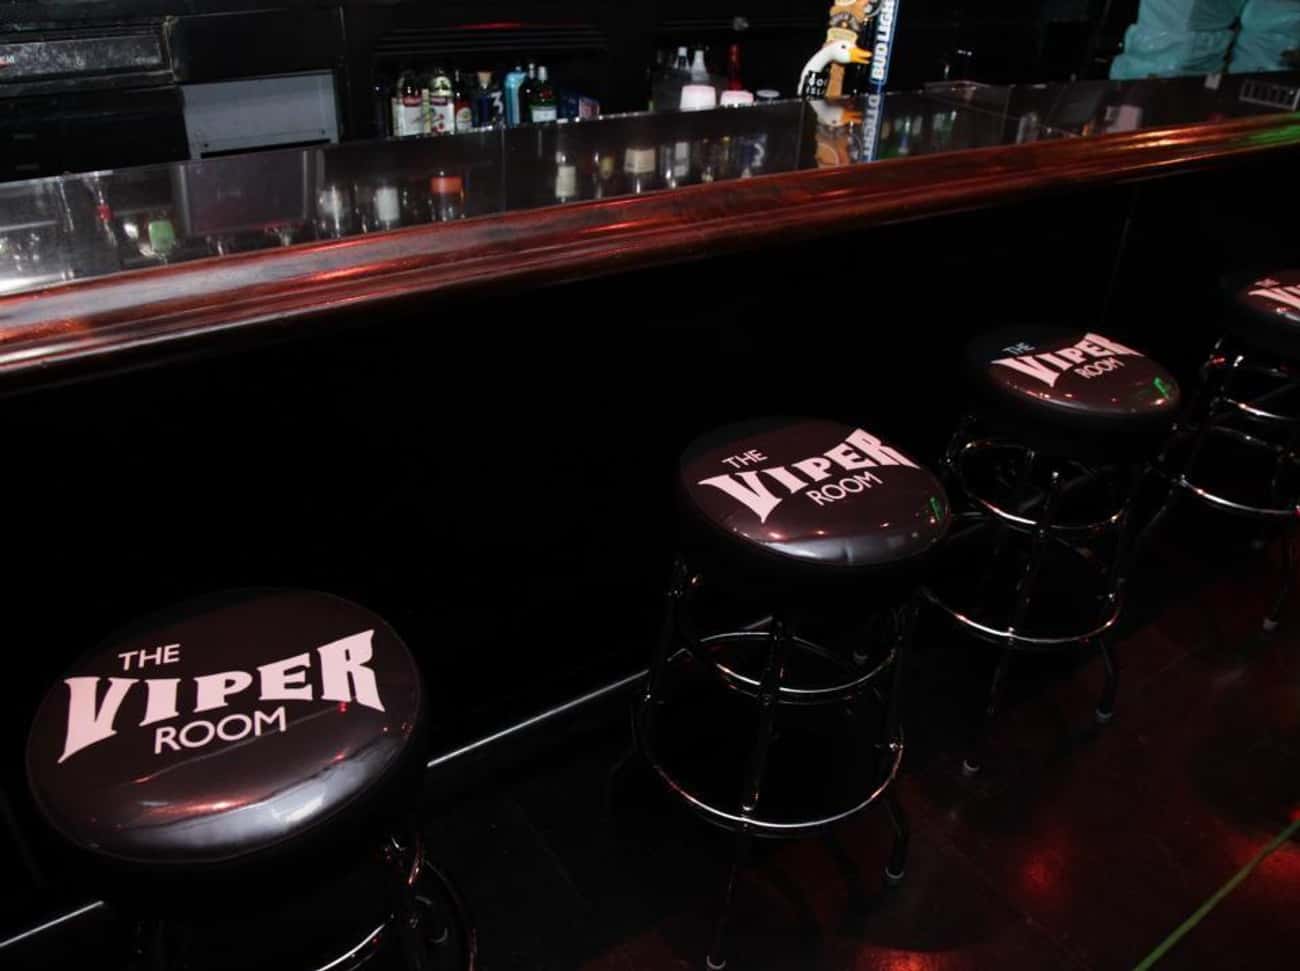 The Viper Room Was The Subject Of An Extra-Spooky 'Ghost Adventures' Episode